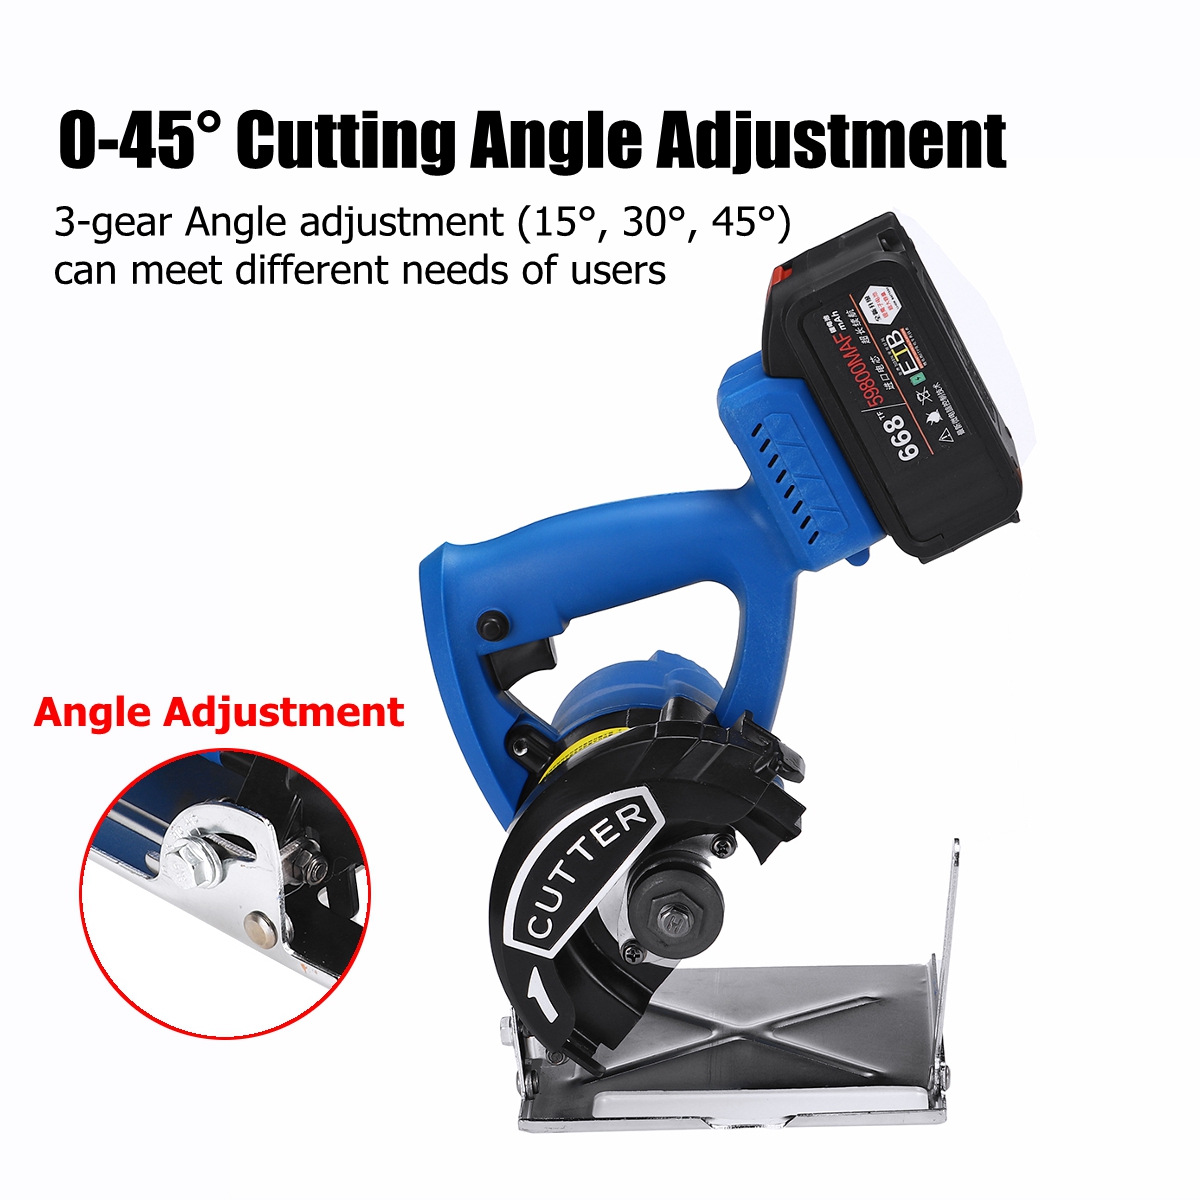 668TF 59800mAh 1500W Cordless Circular Saw Electric Brushless Saw Blade Saw Woodworking Tools Rechargeable Metal Tile Cutting Machine Saws 13